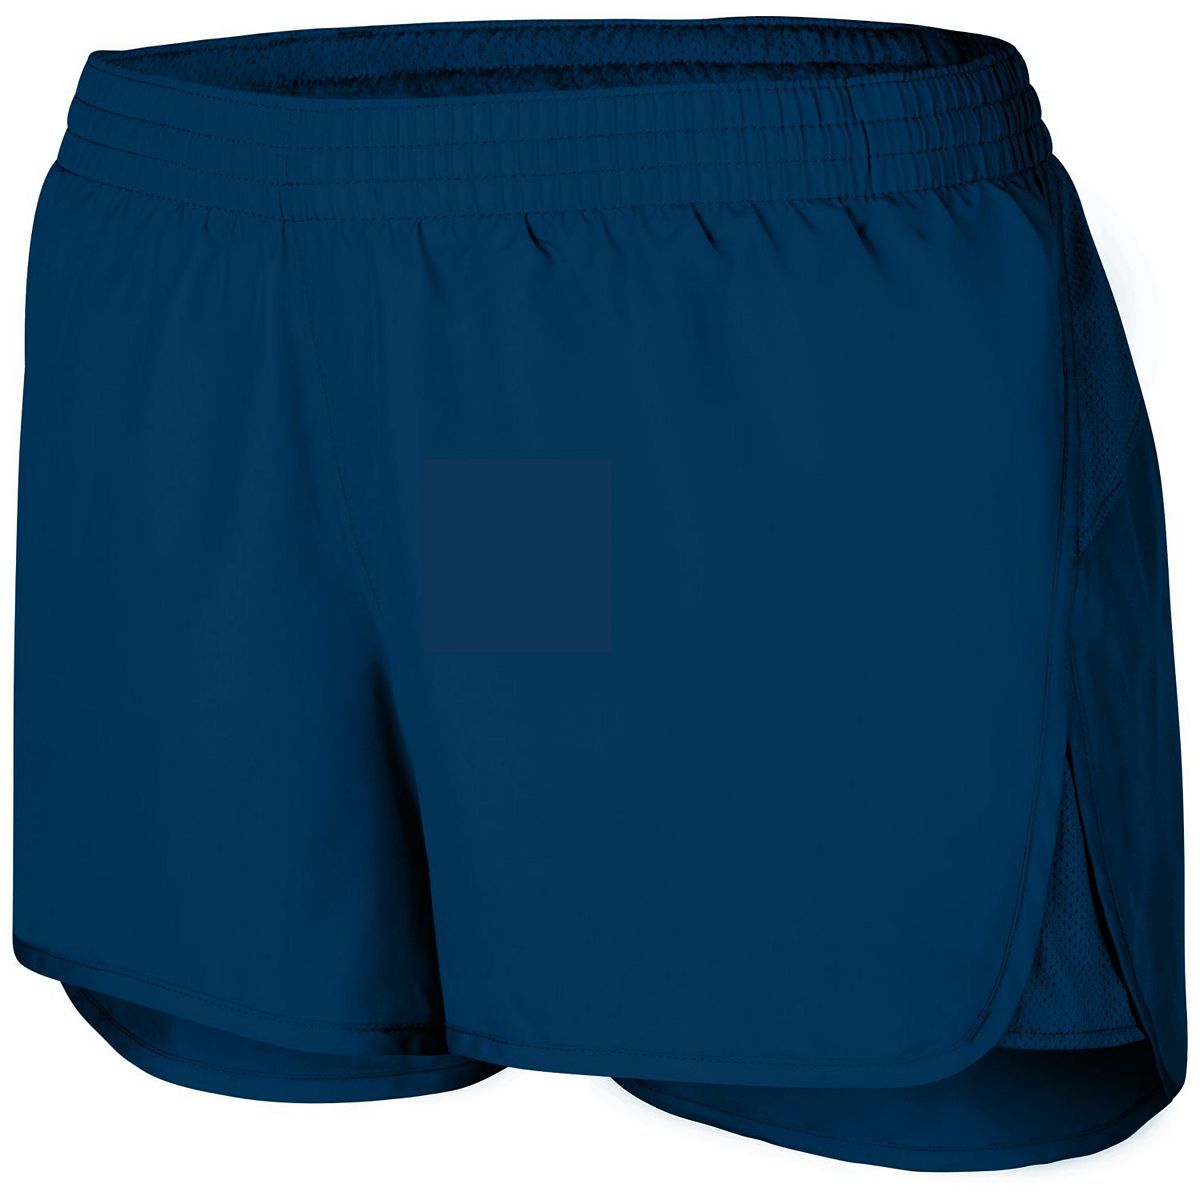 Augusta Sportswear Girls Wayfarer Shorts in Navy  -Part of the Girls, Augusta-Products, Girls-Shorts product lines at KanaleyCreations.com